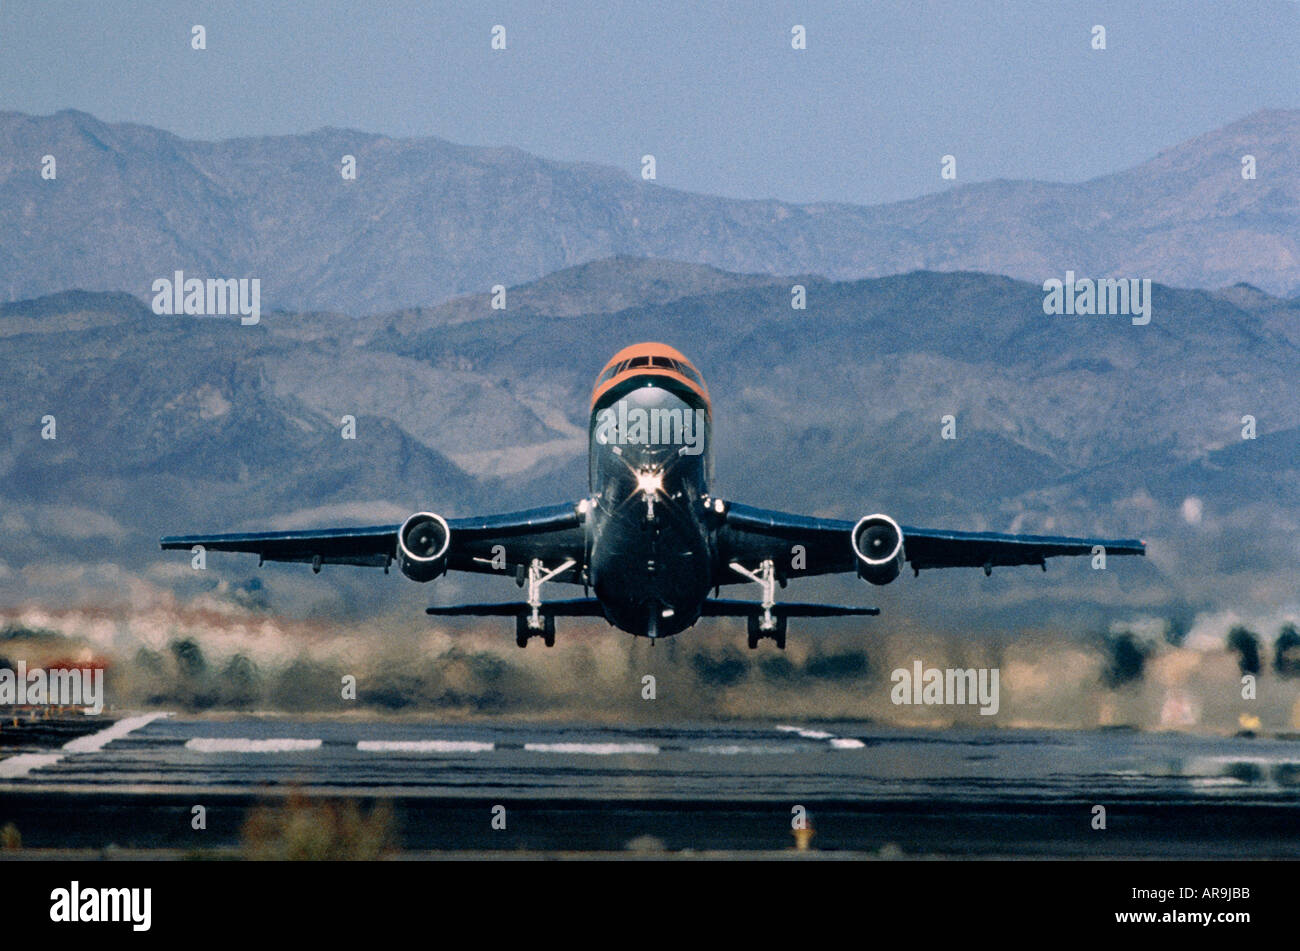 widebody jumbo jet airliner taking off just airborne above runway head on view with hills mountains in background Stock Photo